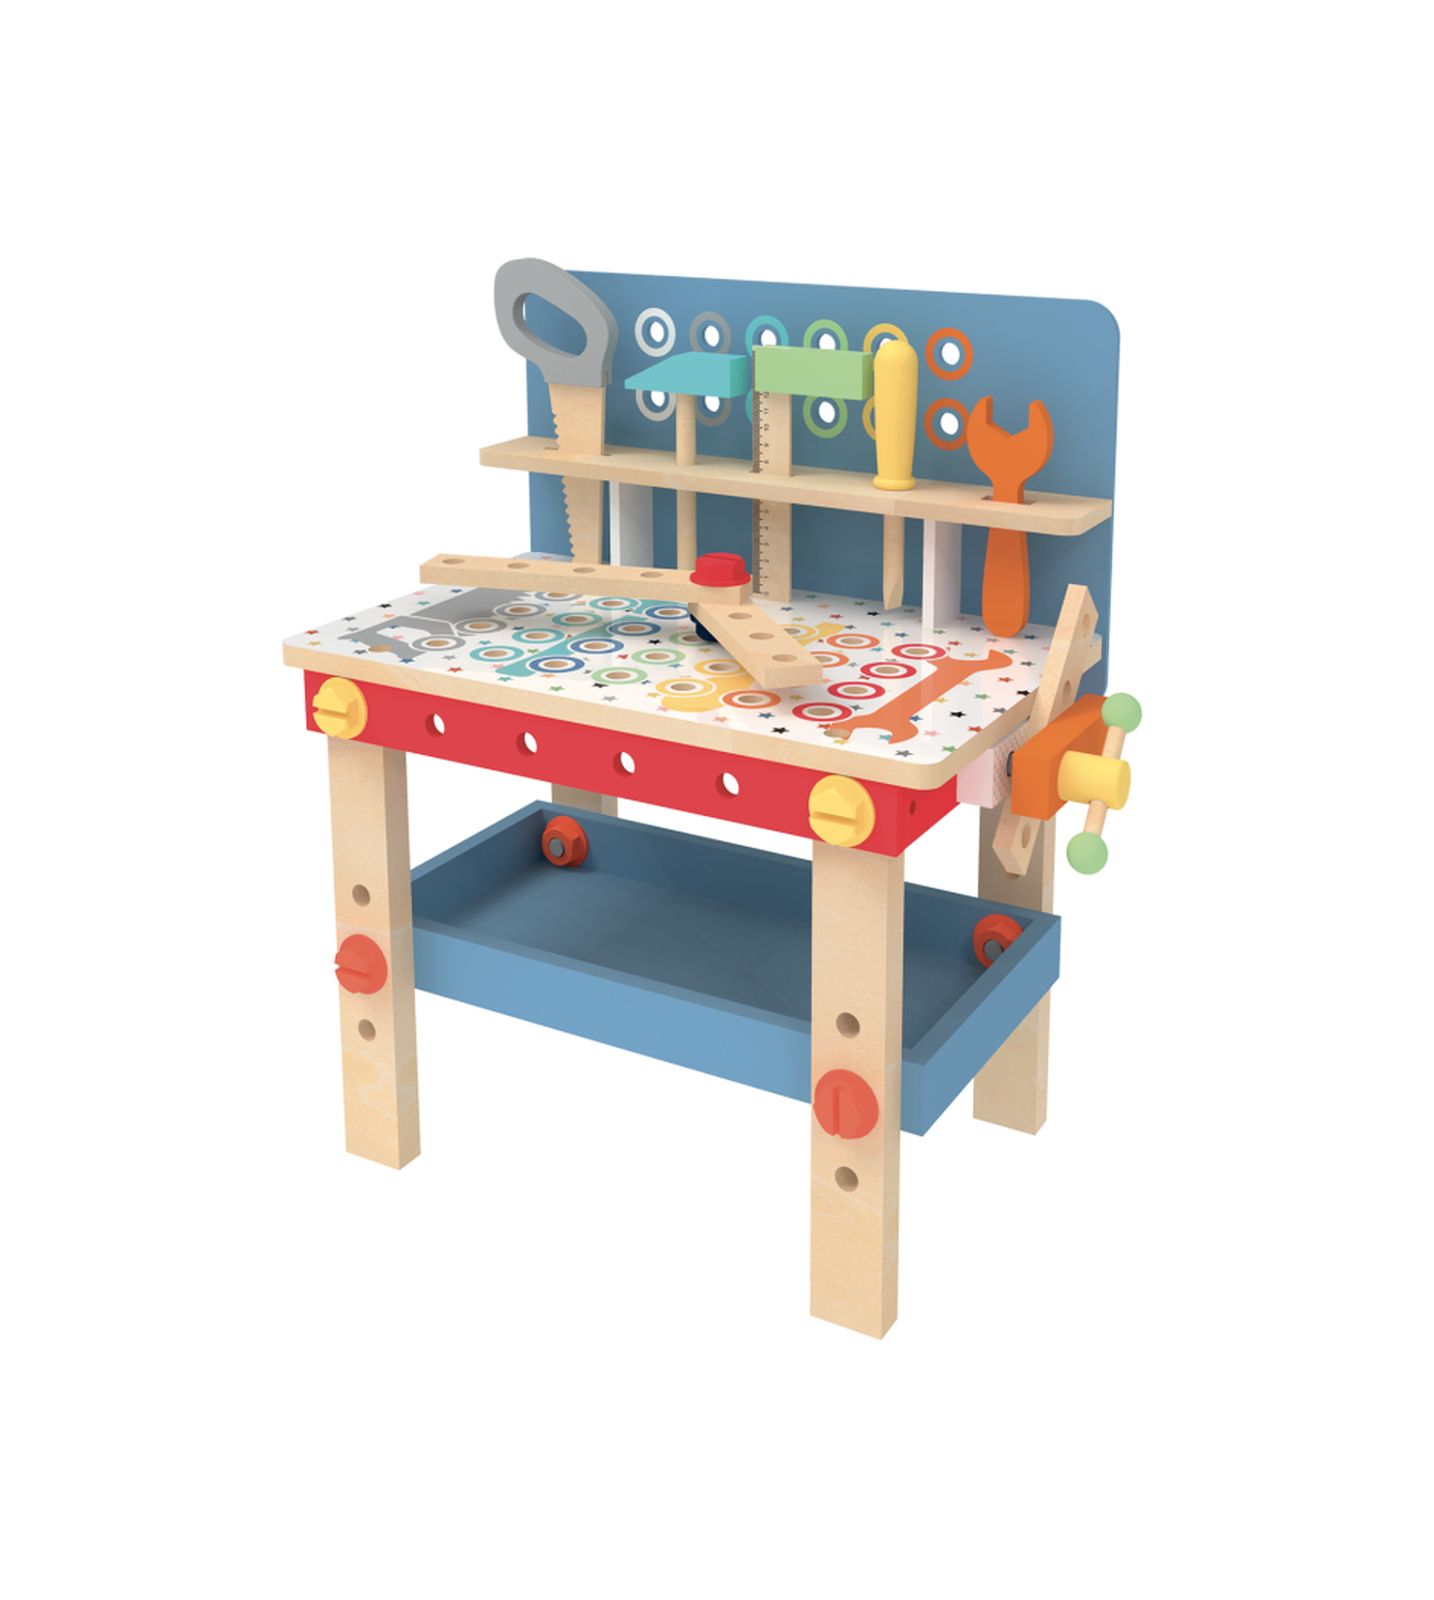 Banchetto lavoro - WOOD 'N' PLAY